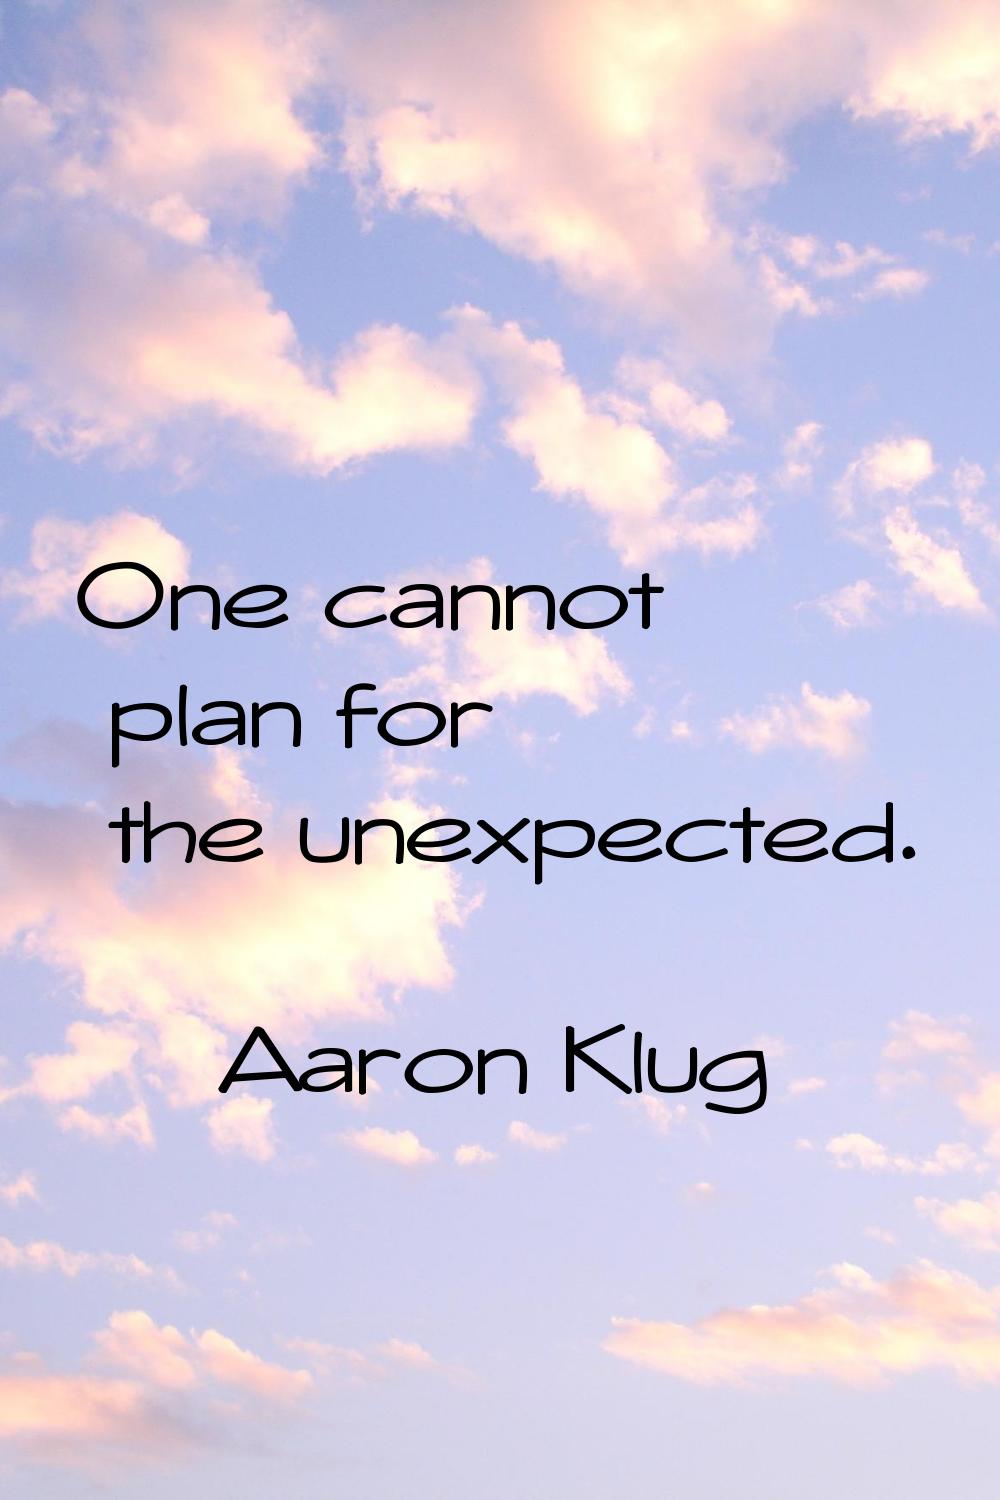 One cannot plan for the unexpected.